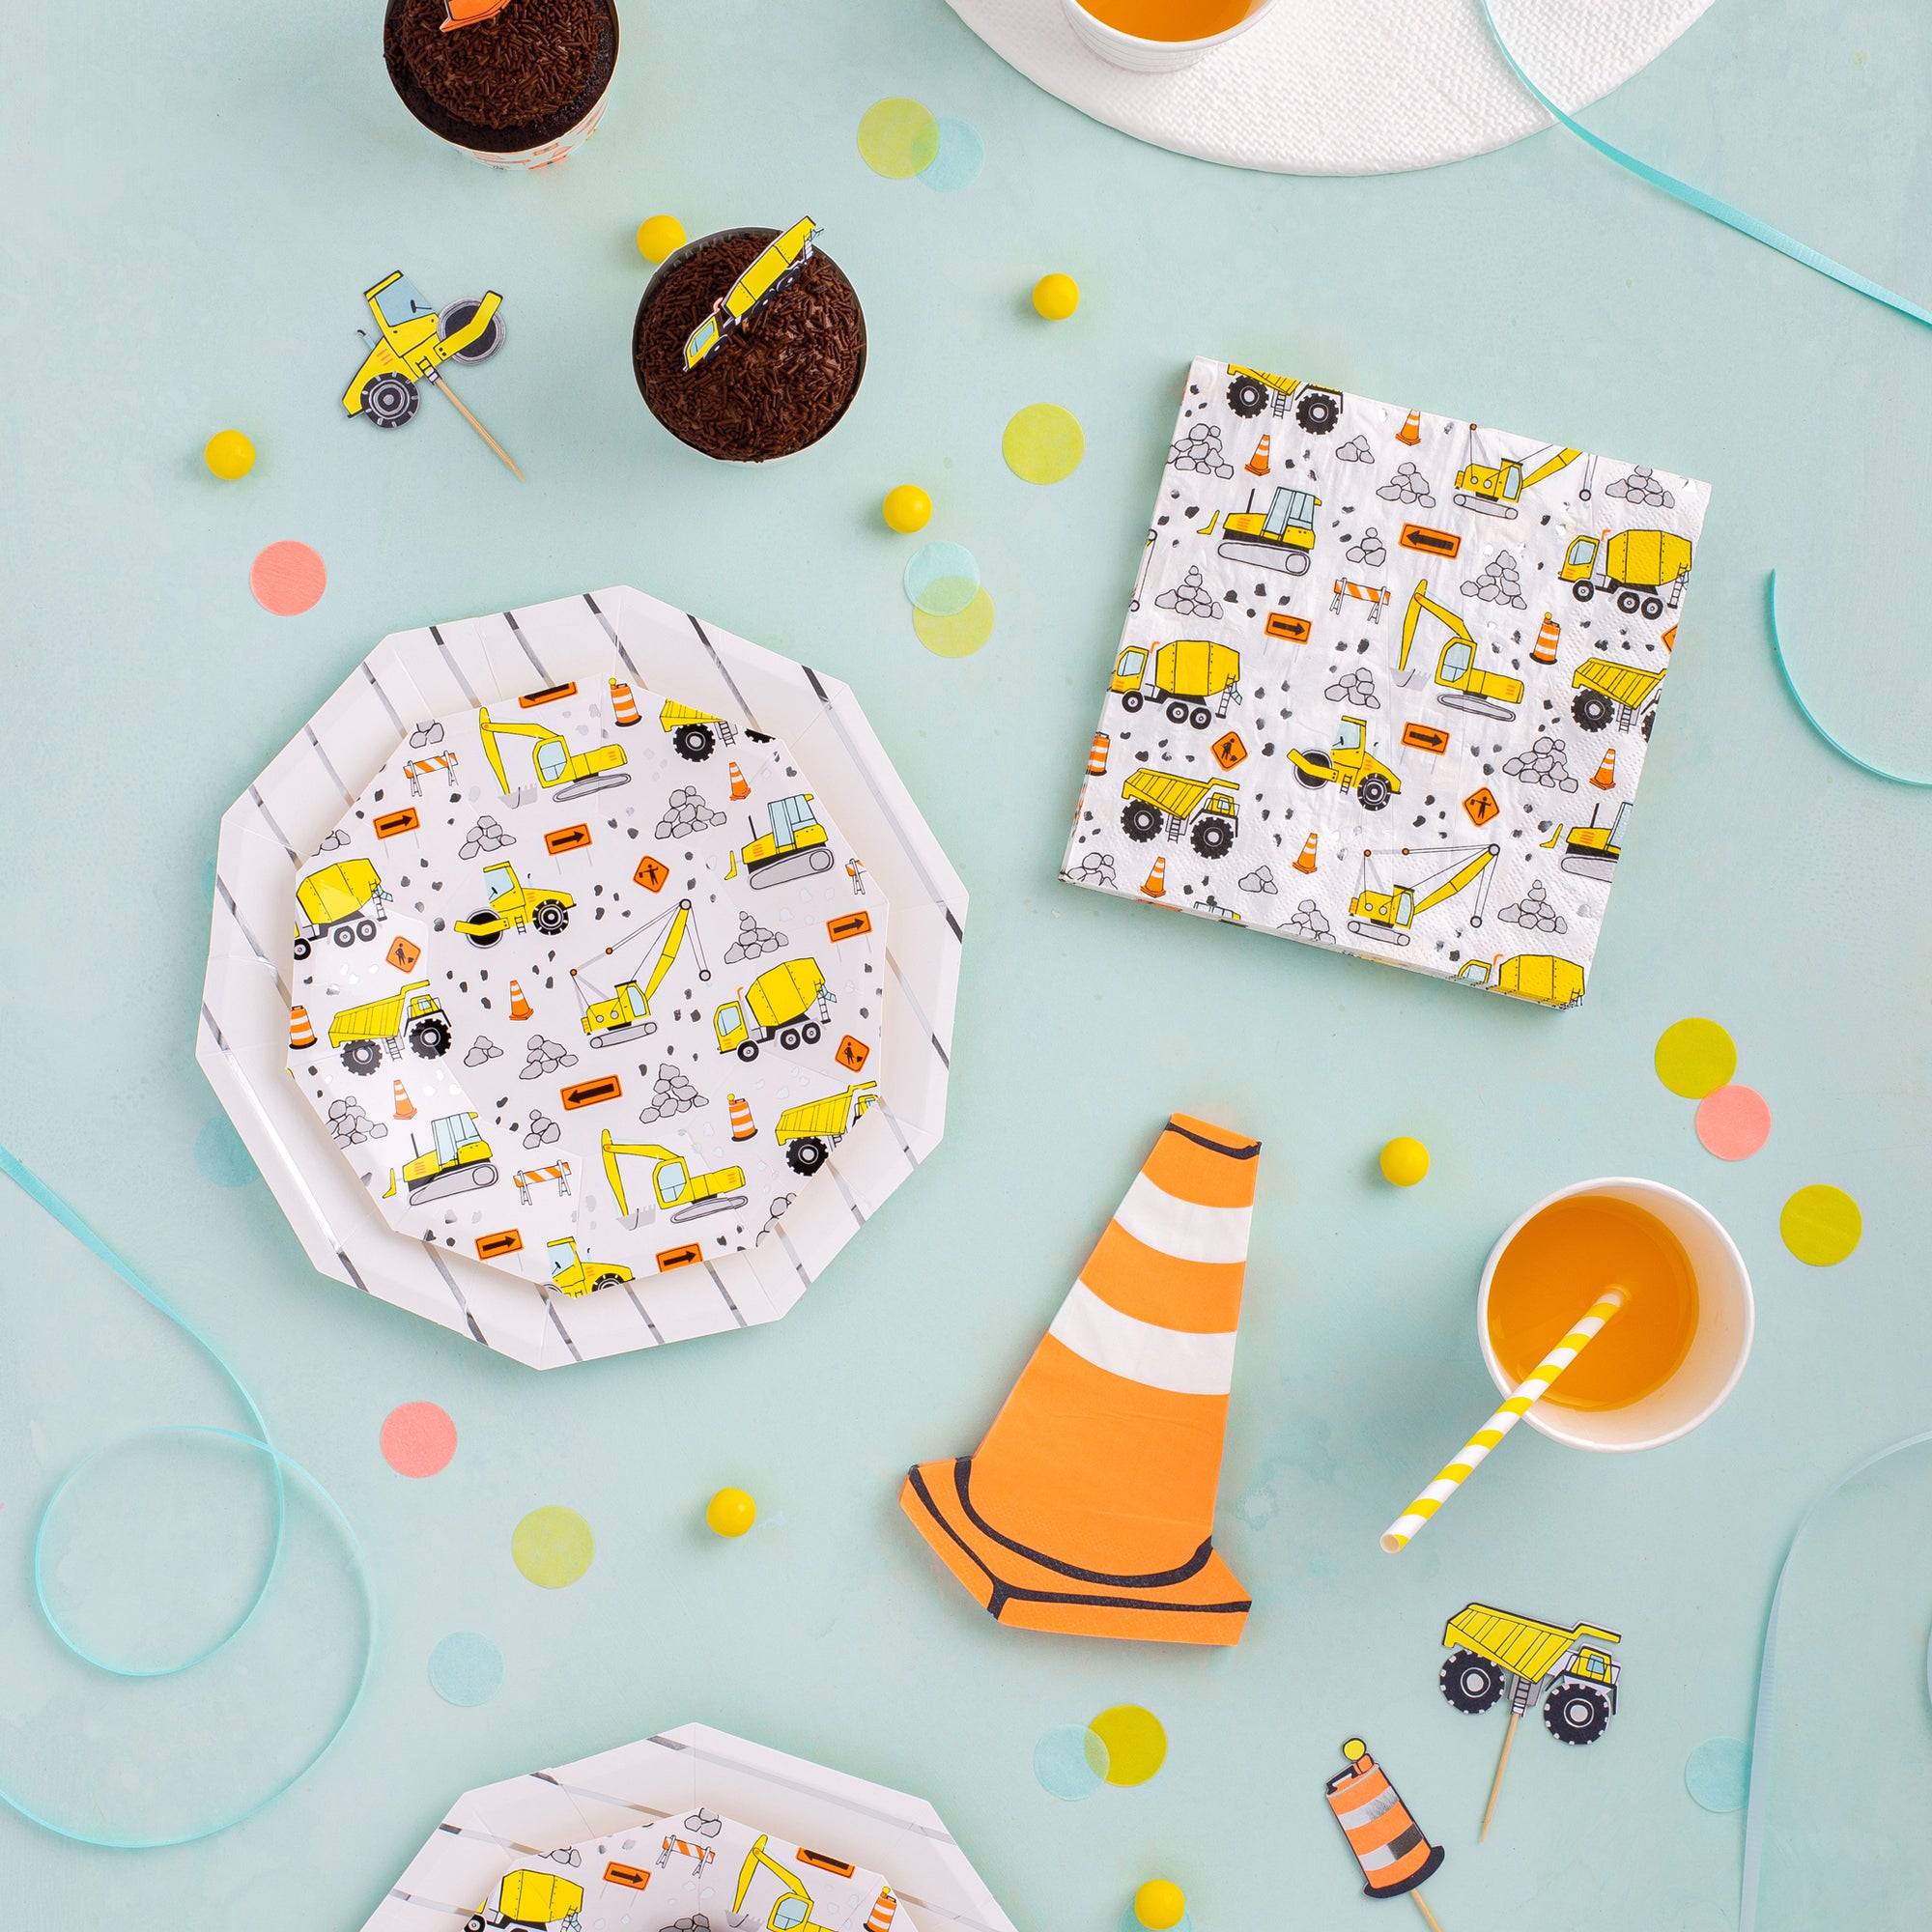 Under Construction Lunch Napkins 16ct | The Party Darling